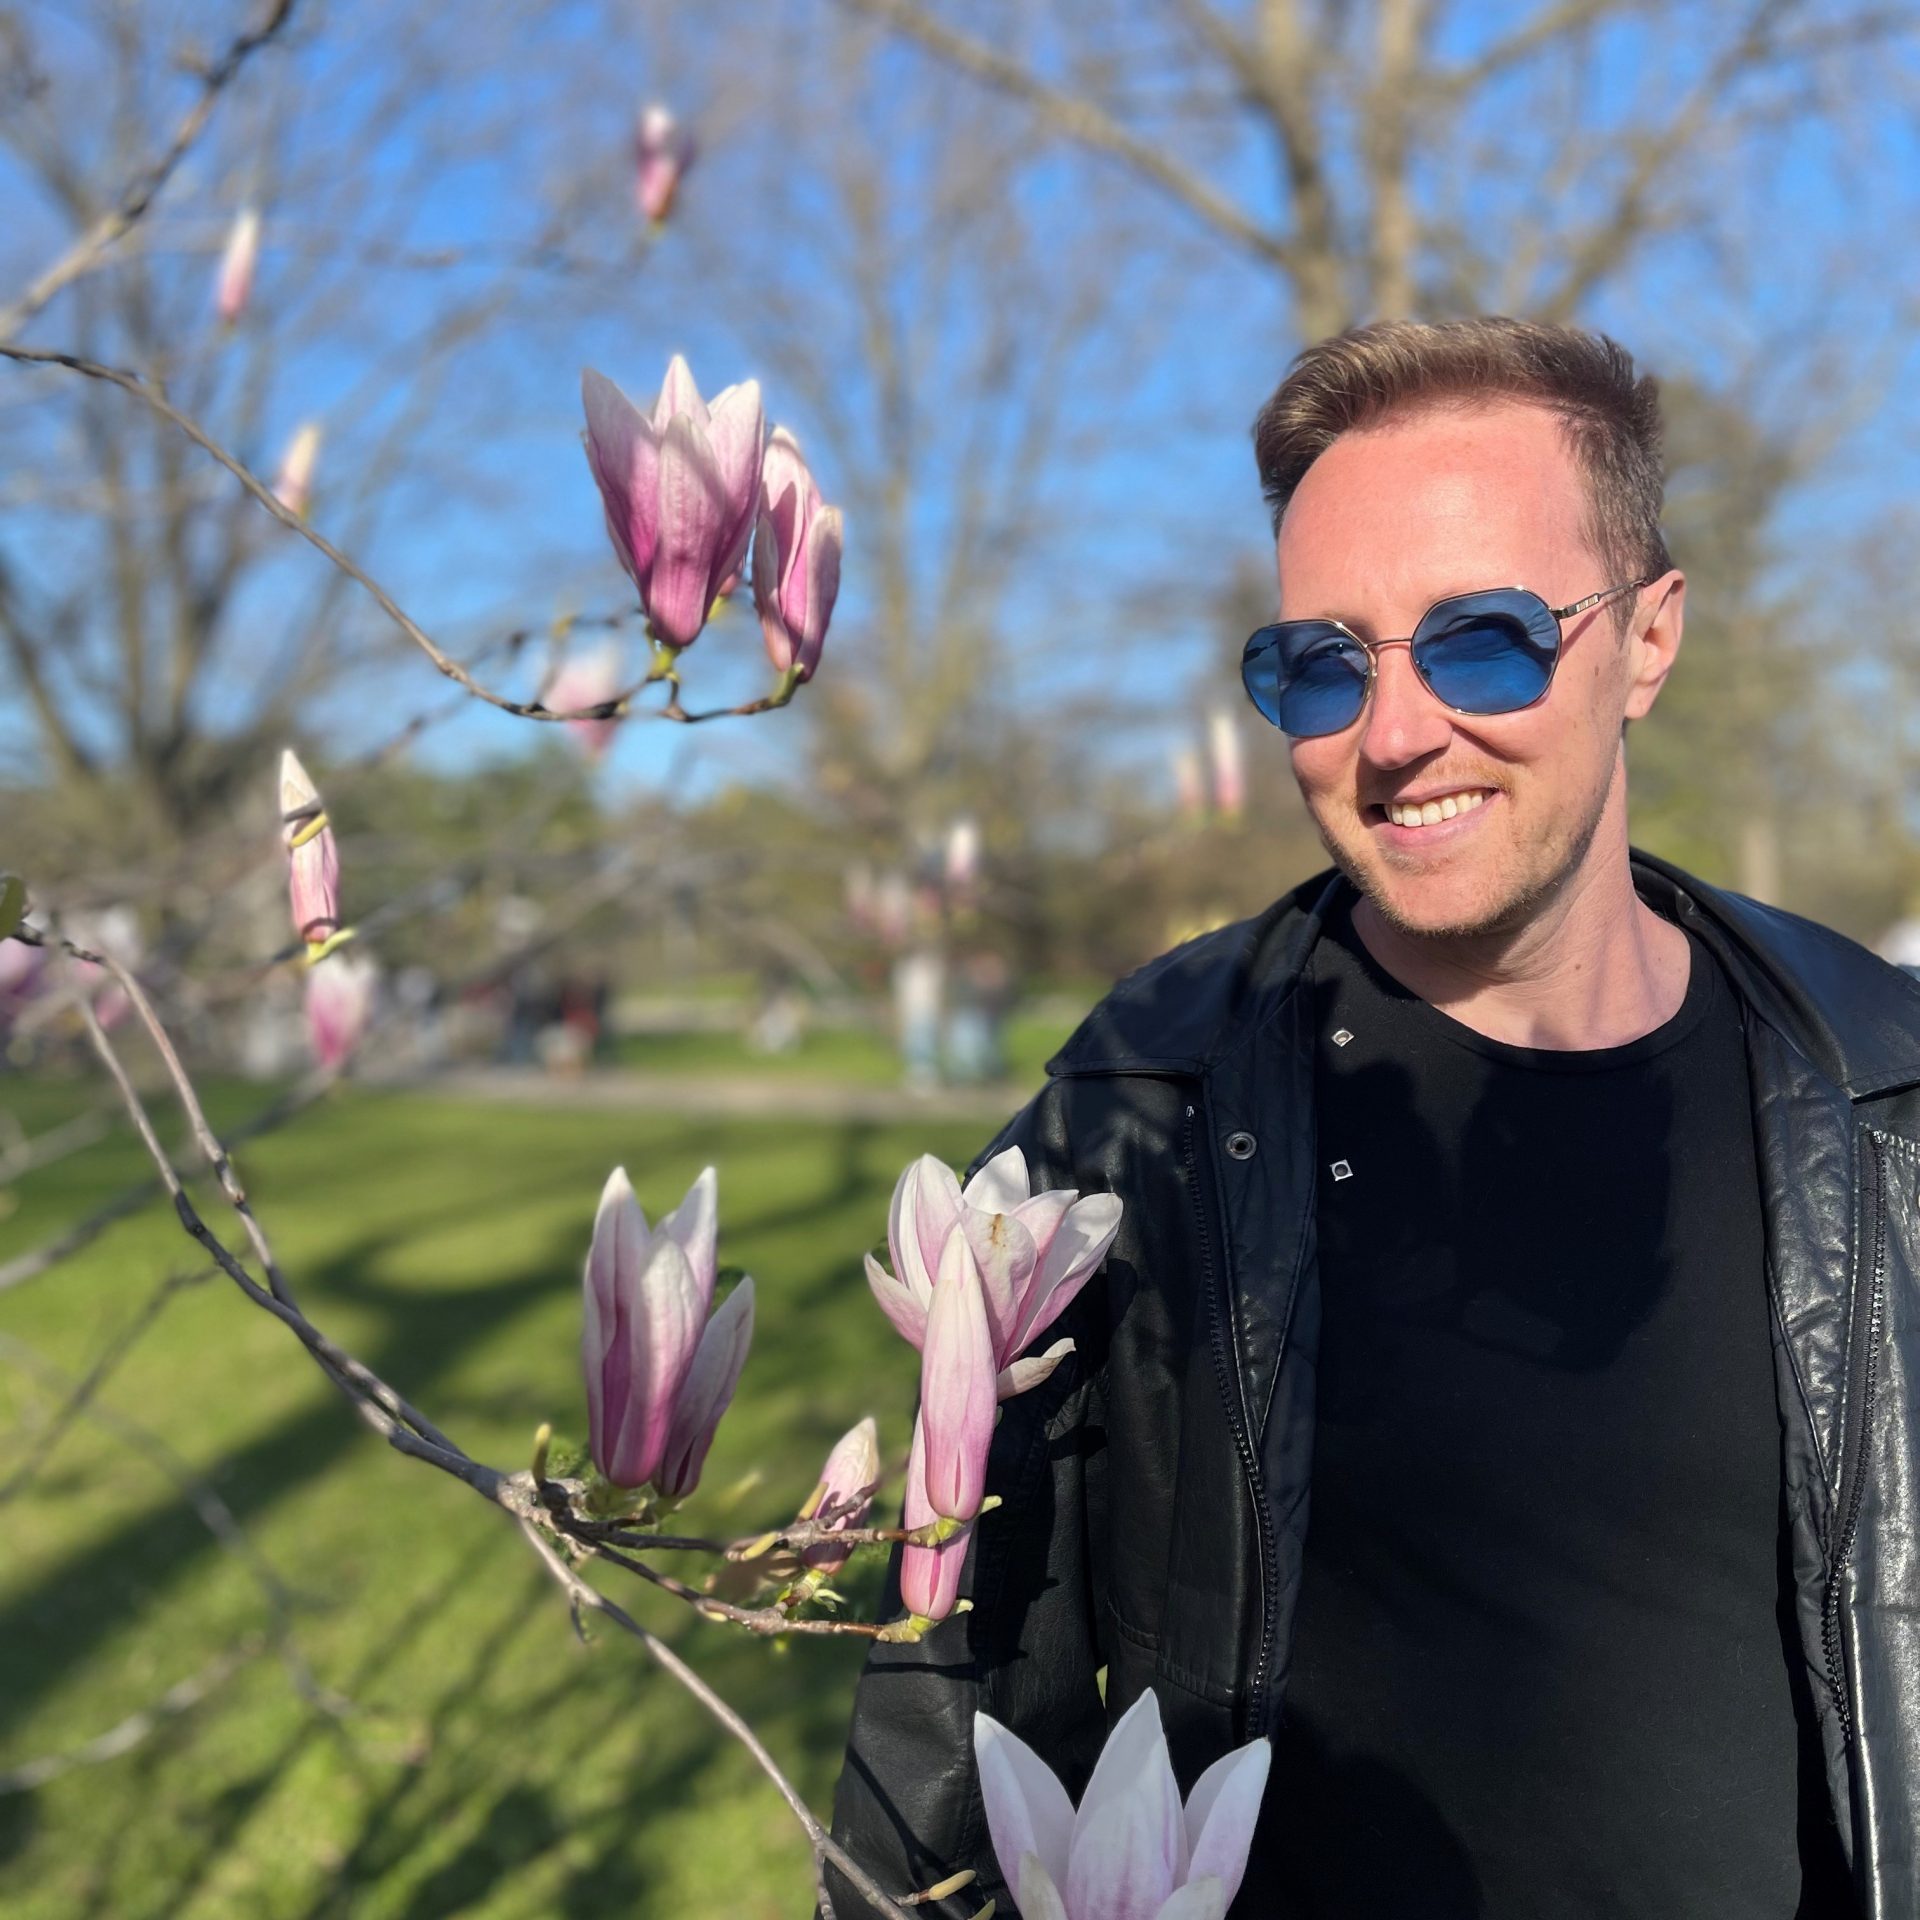 Derek, wearing blue lensed sunglasses posing with a branch of Cherry Blossoms.